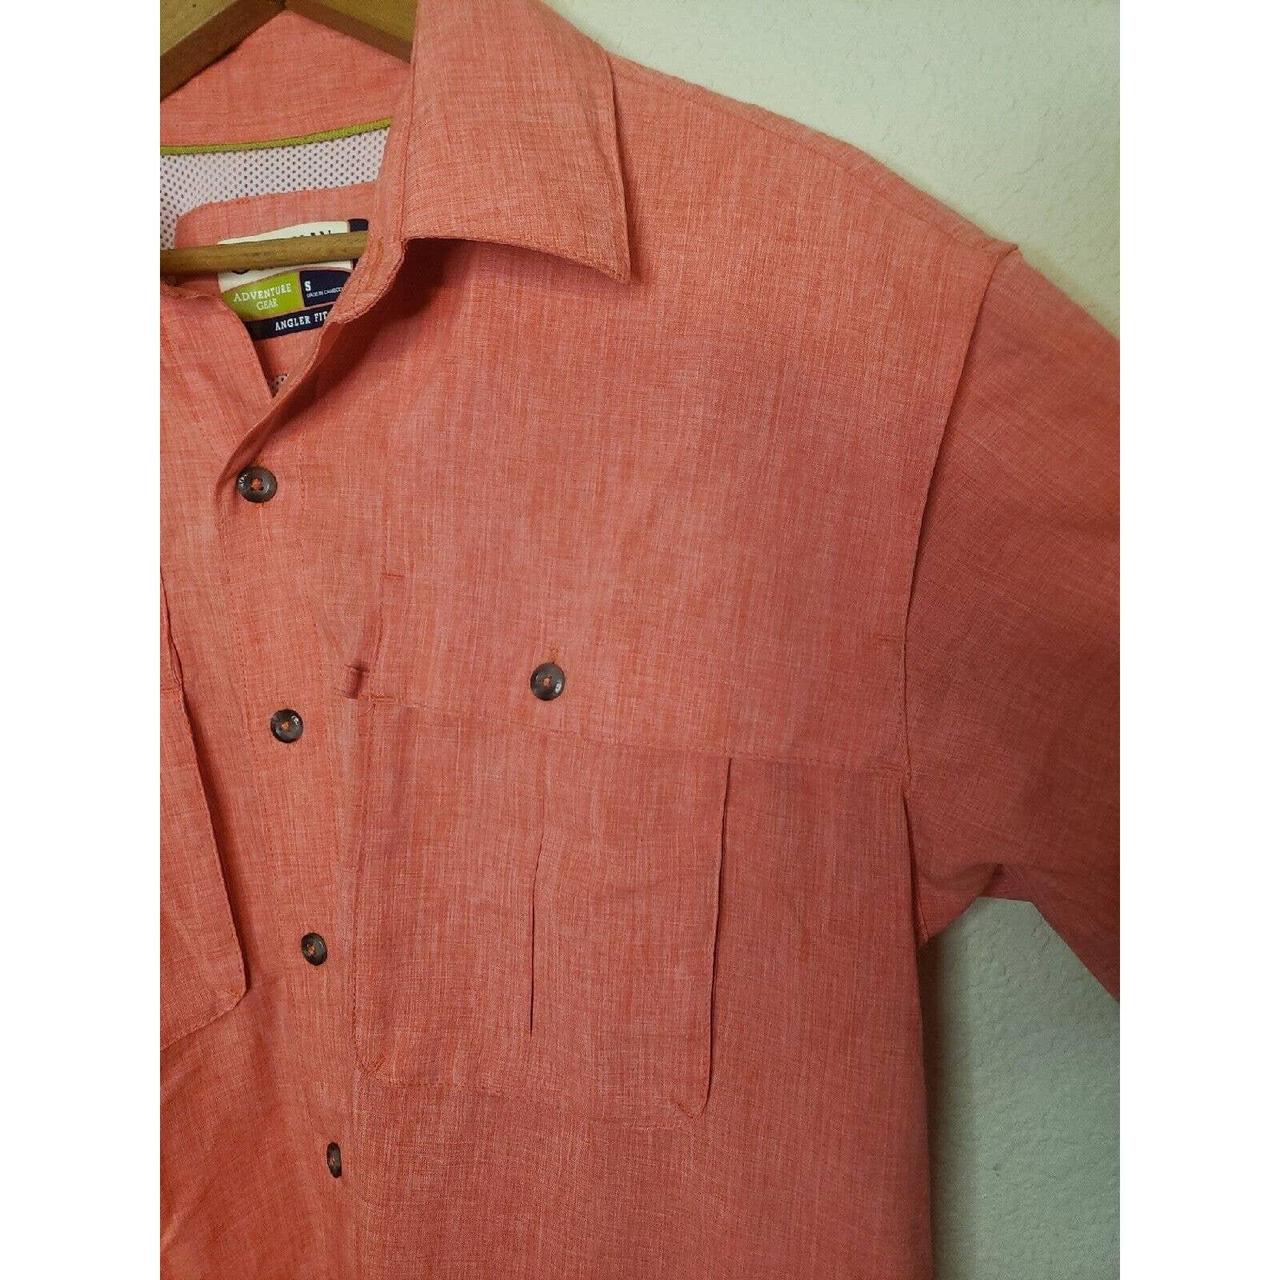 Magellan Mens Reddish Pink Button Up Vented Fishing Outdoor S/S Shirt Size  XL